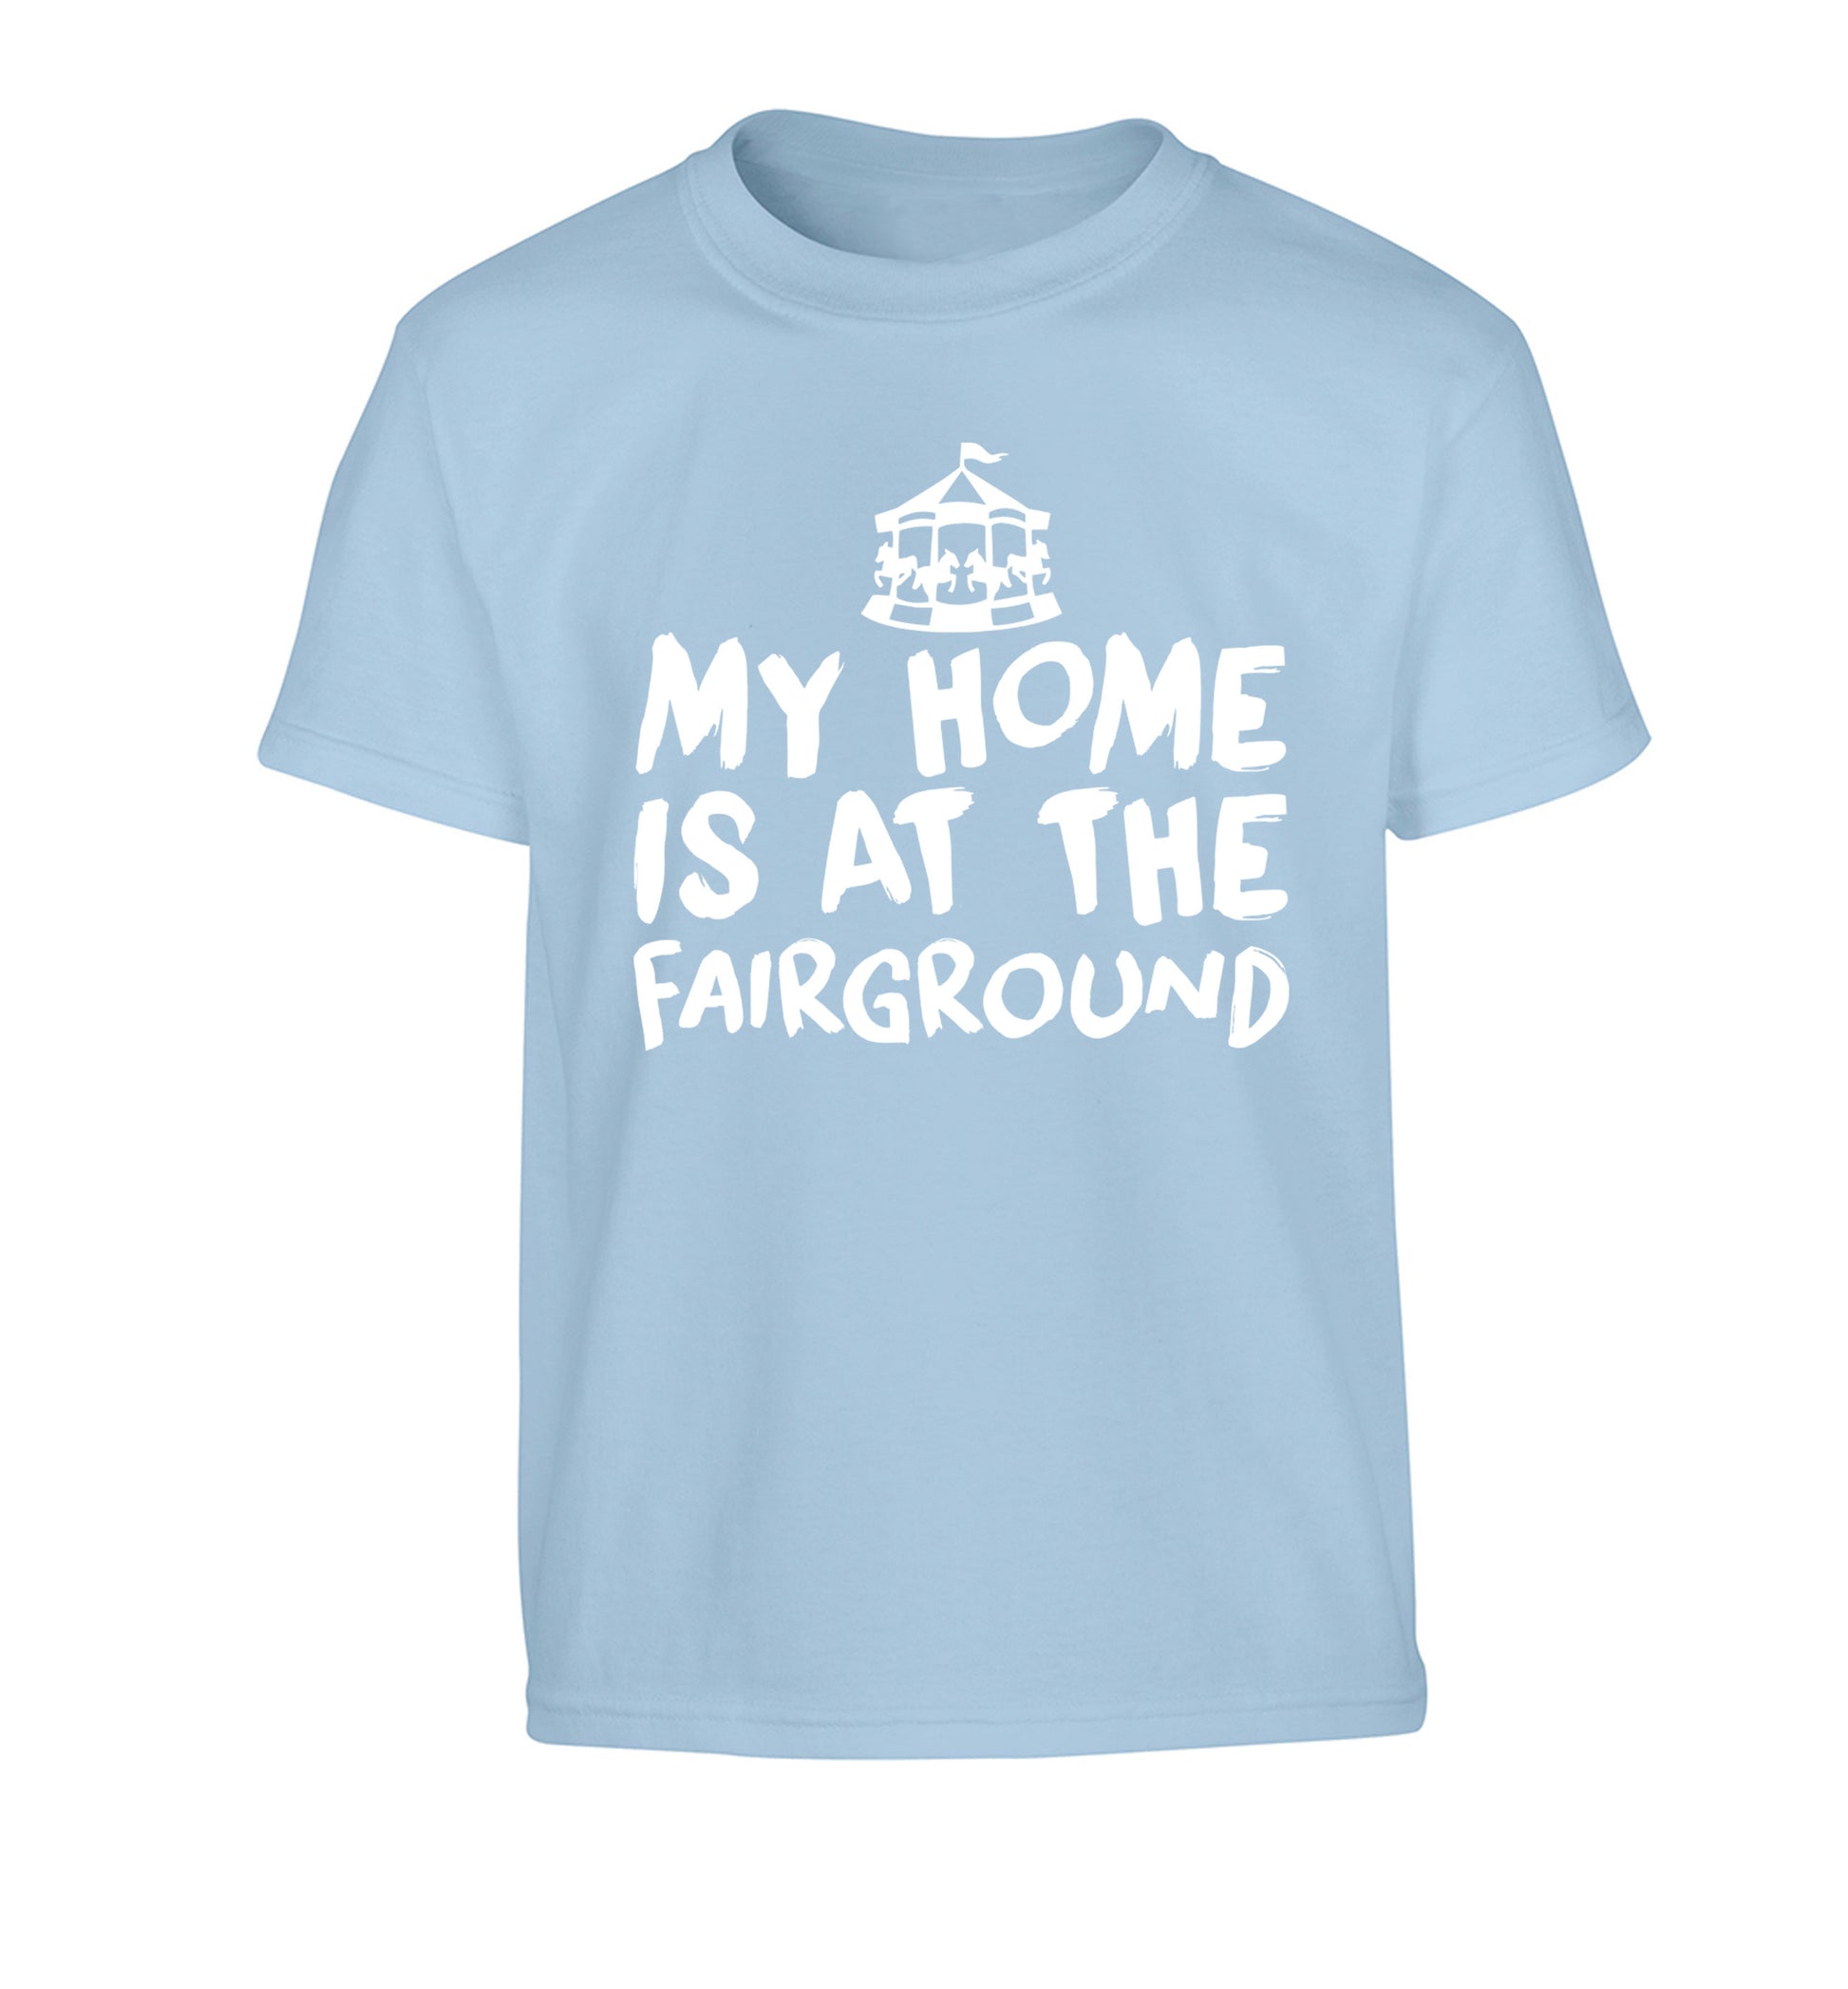 My home is at the fairground Children's light blue Tshirt 12-14 Years